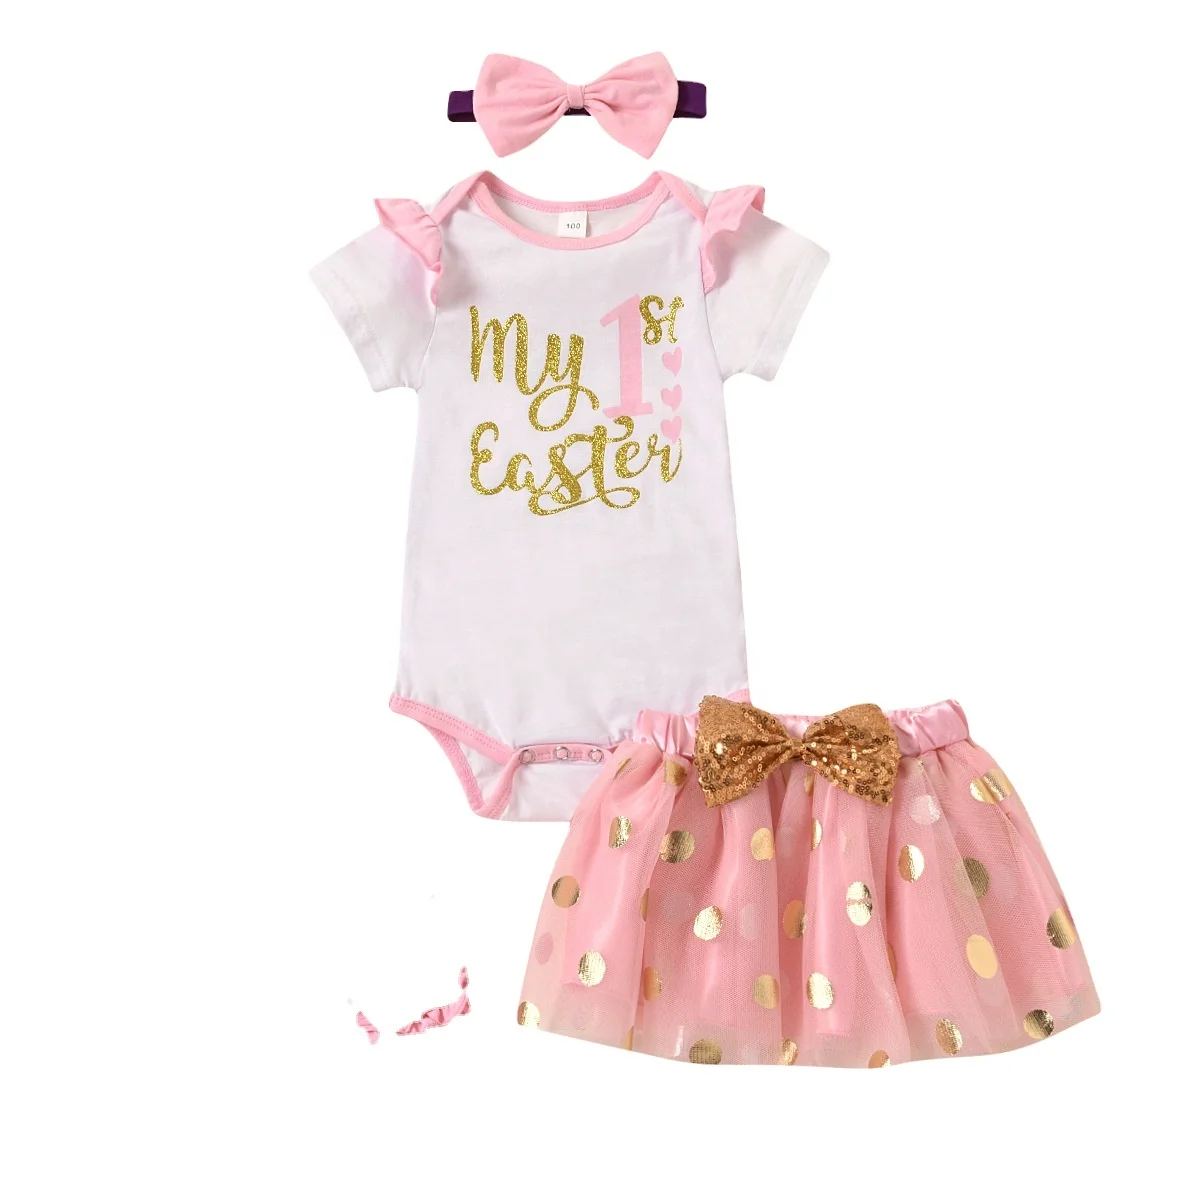 Baby Girl Birthday Cake Smash Outfit Toddler Girl My 1st Birthday Romper Tutu Skirt with Headband Clothes Set 